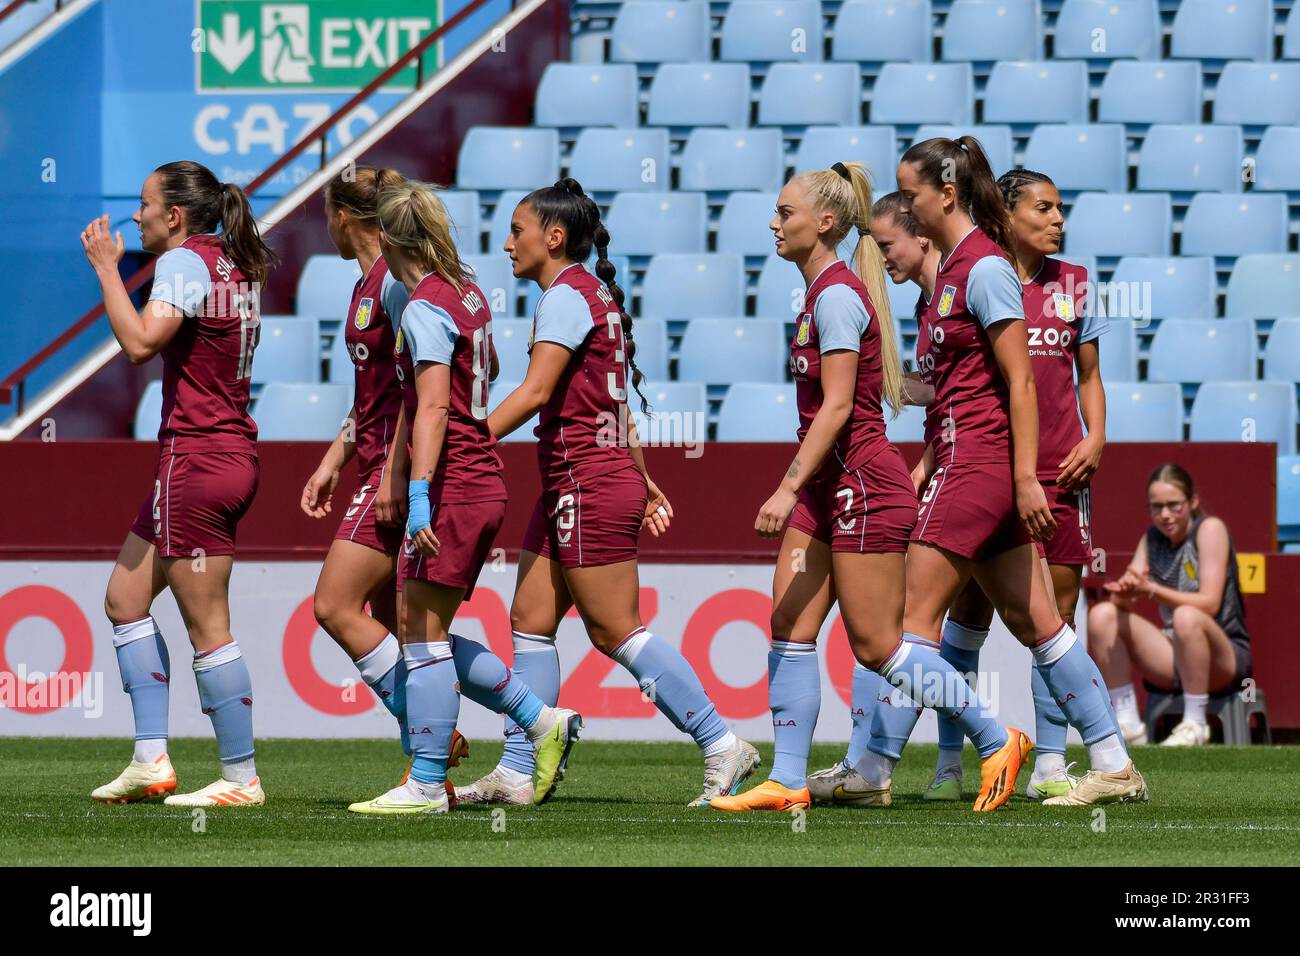 Birmingham, England. 21 May 2023. Aston Villa players celebrate their side's opening goal during the Barclays Women's Super League game between Aston Villa and Liverpool at Villa Park in Birmingham, England, UK on 21 May 2023. Credit: Duncan Thomas/Majestic Media/Alamy Live News. Stock Photo